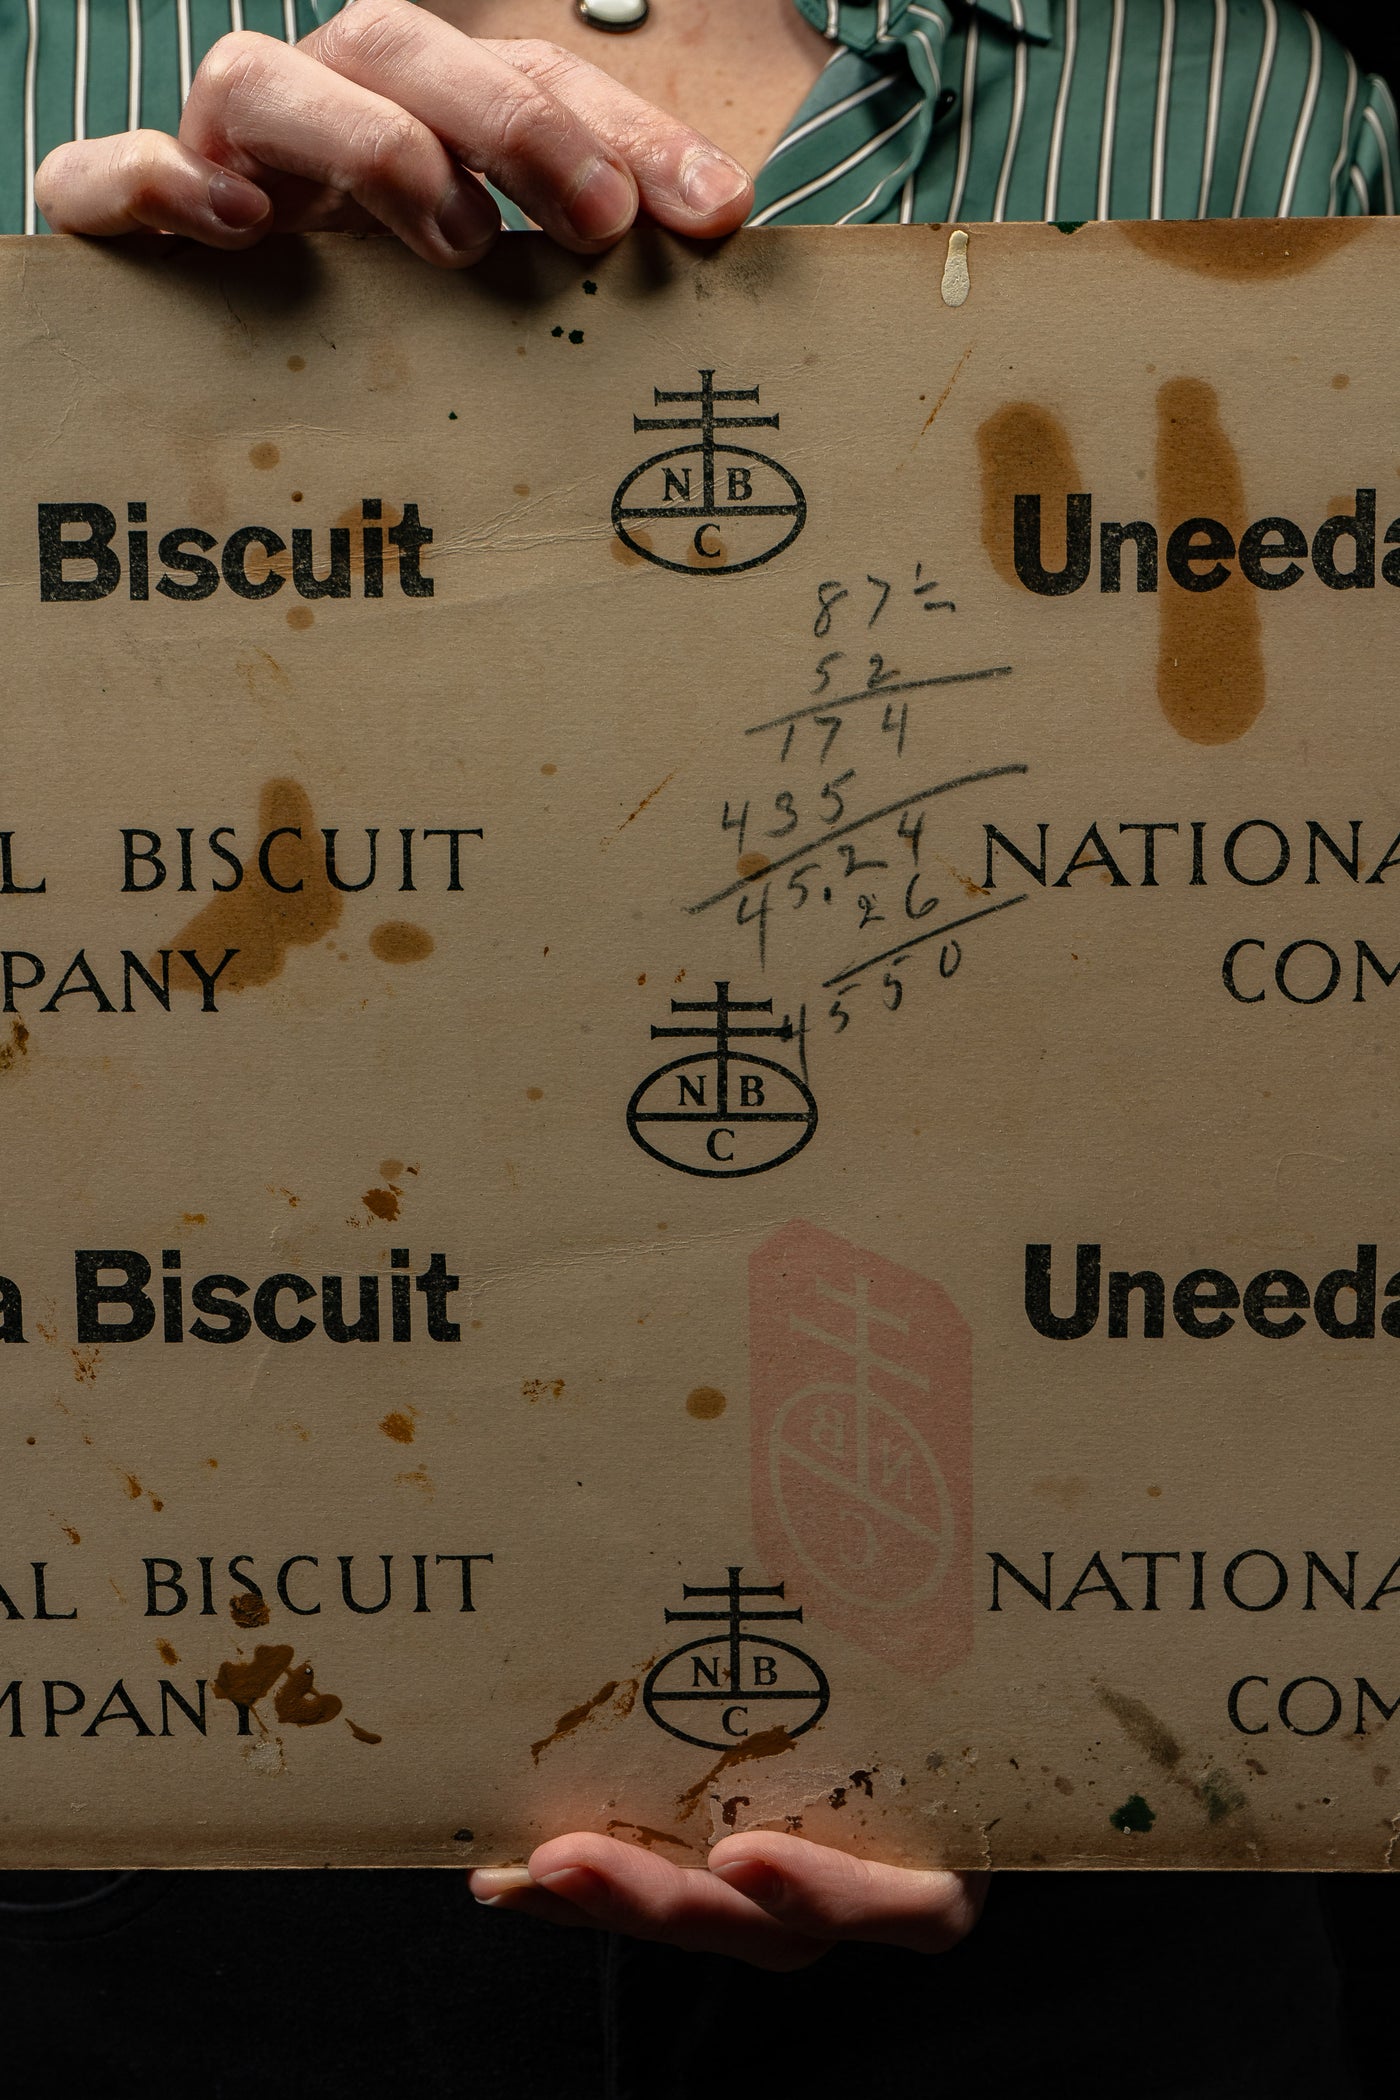 Early 20th Century (Pre-Nabisco) Uneeda Biscuit Trolley Car Advertising Sign